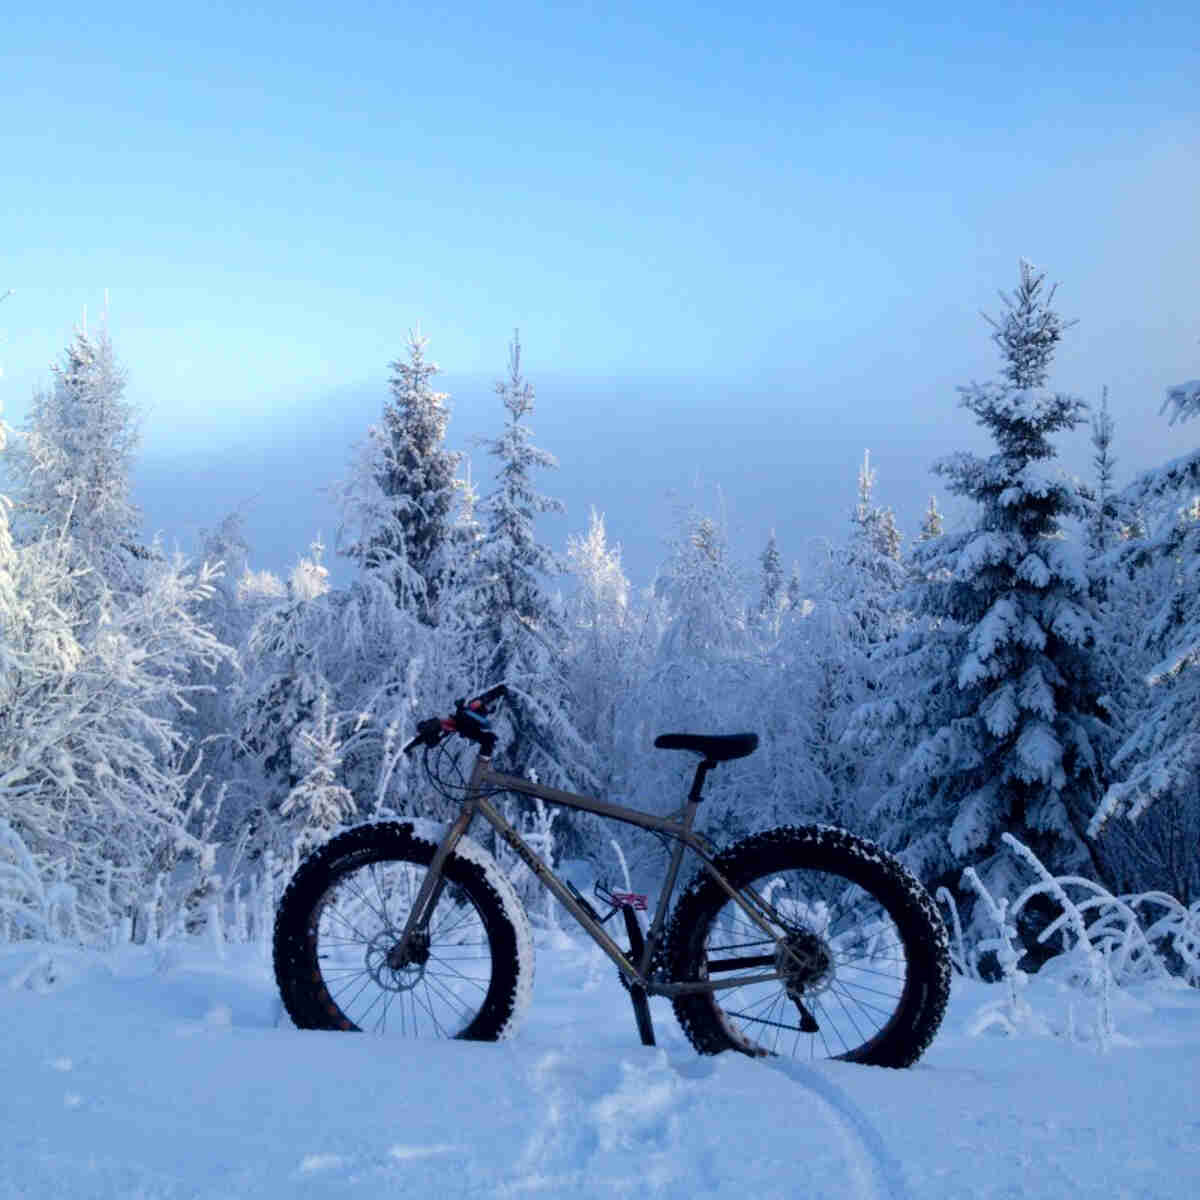 Left side view of a Surly Moonlander fat bike, parked in deep snow, with snowy trees in the background